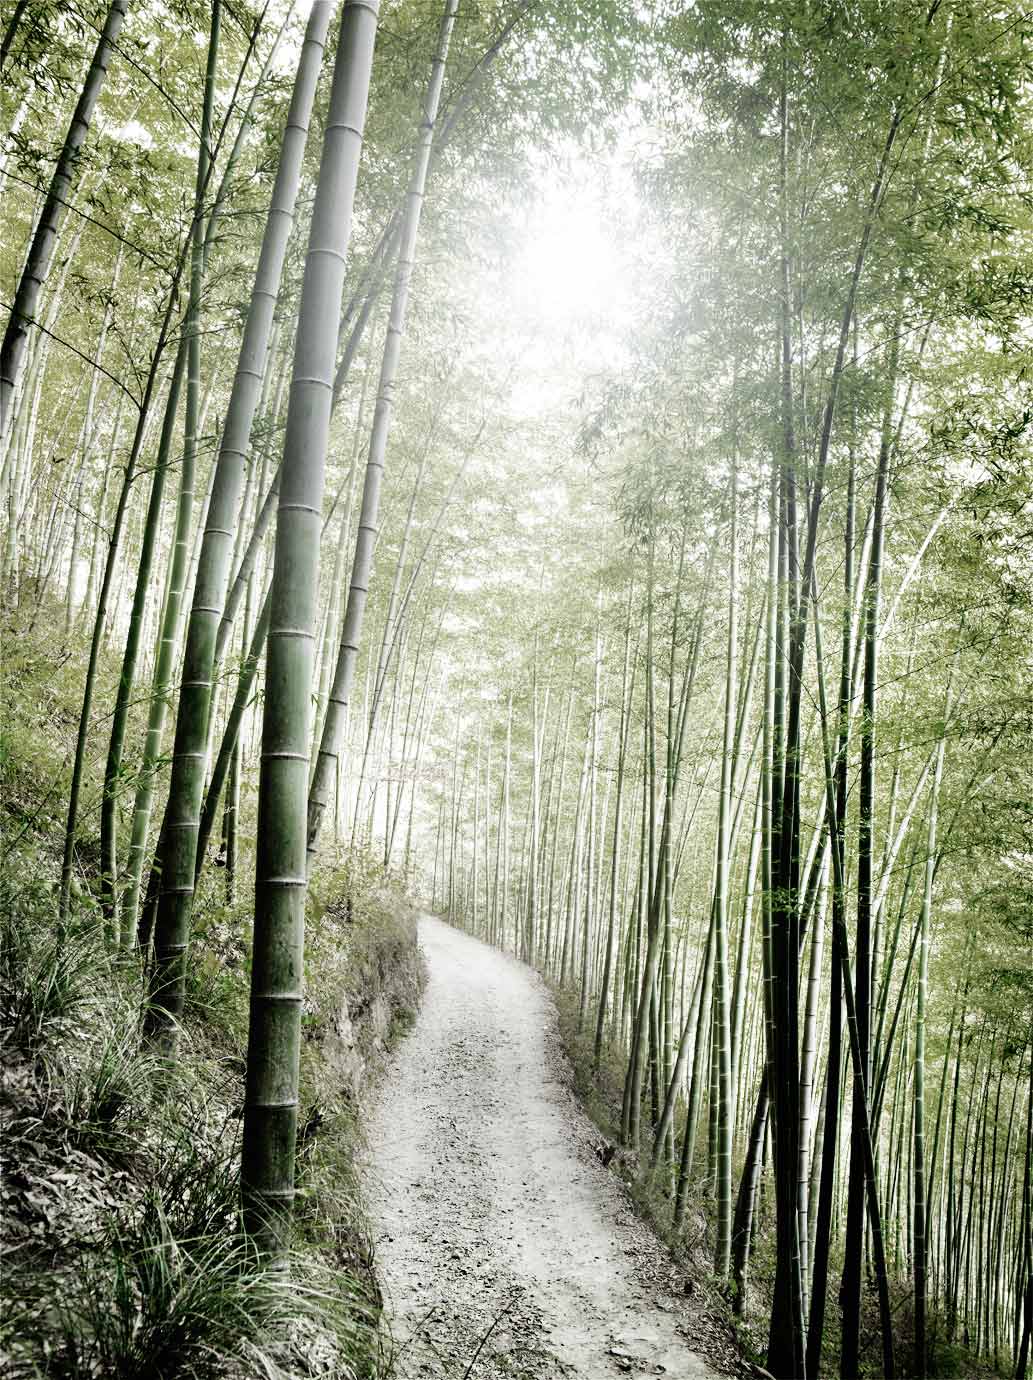 Bamboo Forrest, China